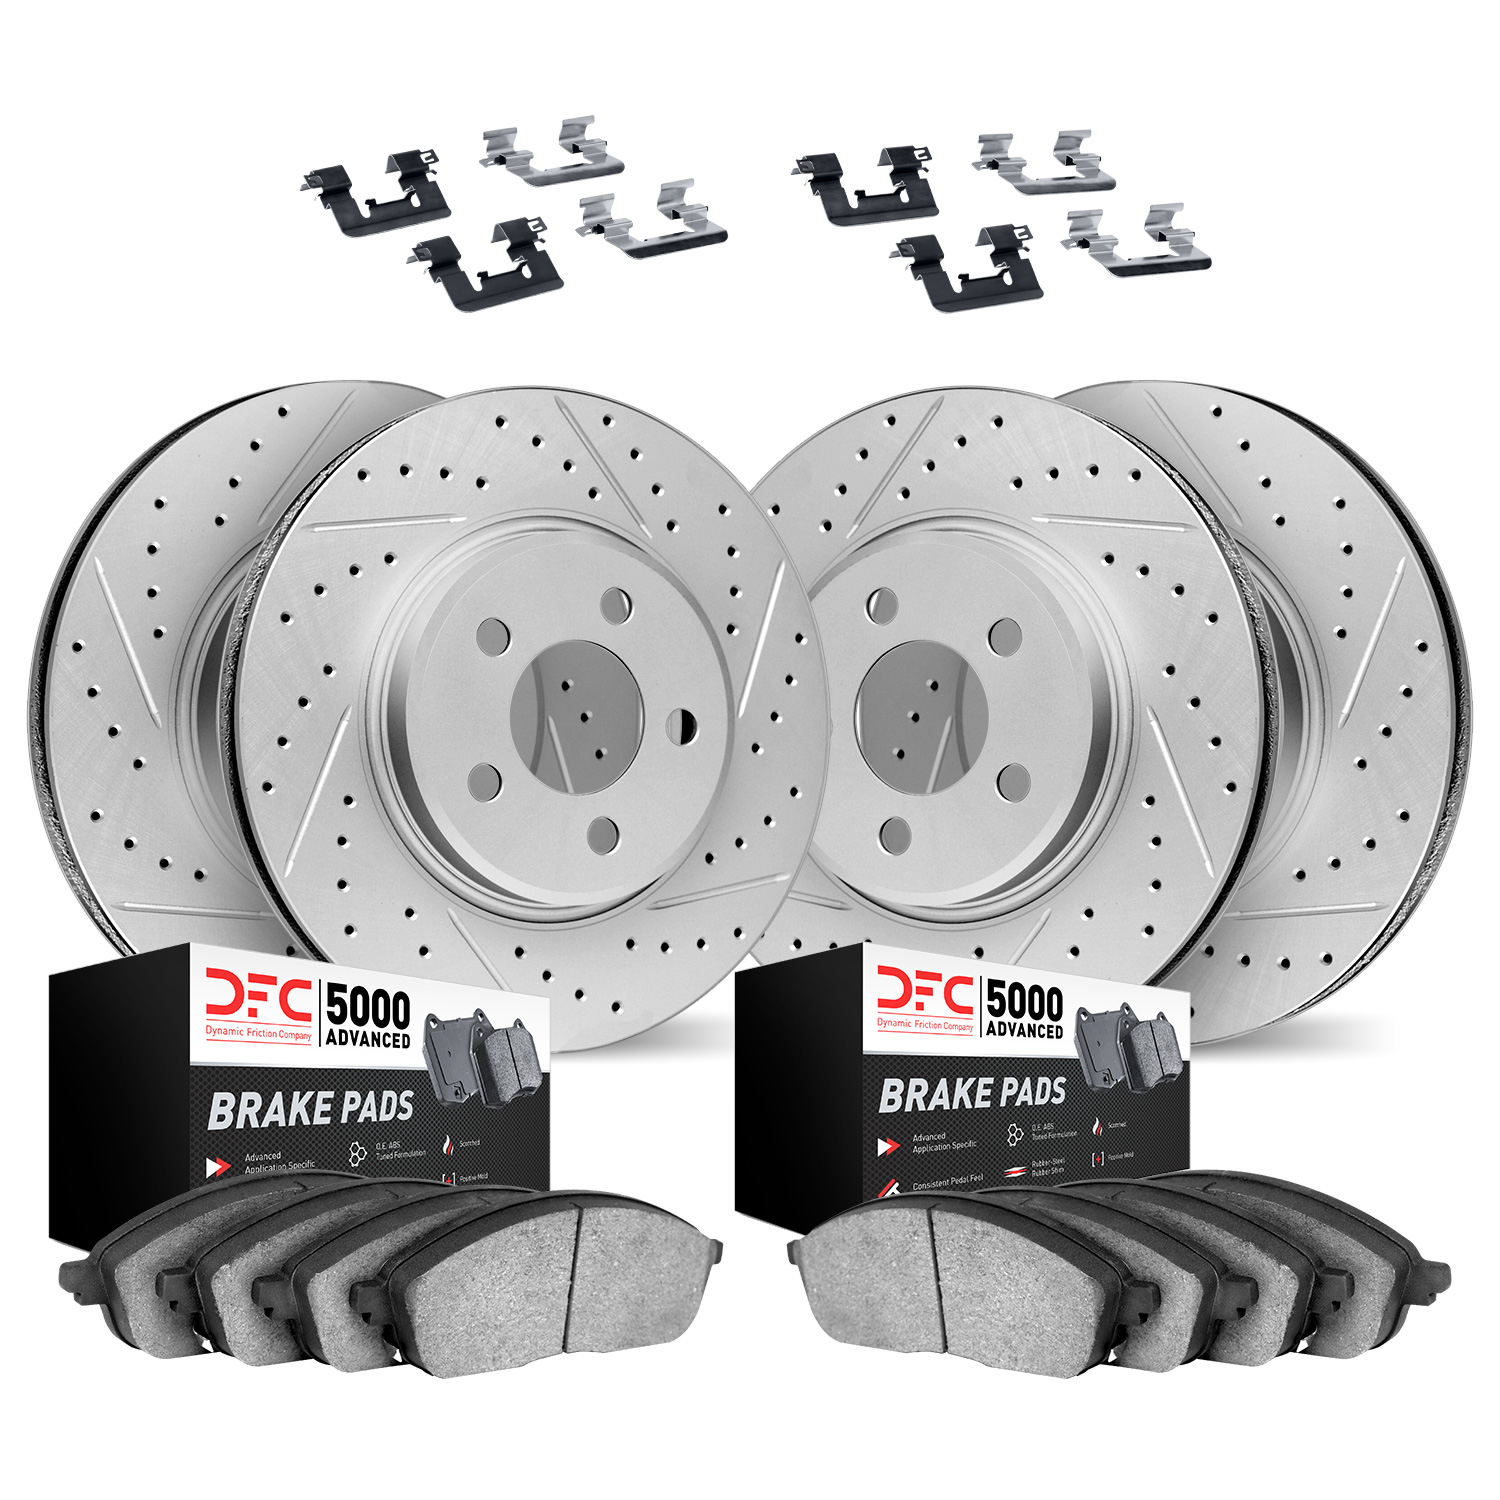 2514-31013 Geoperformance Drilled/Slotted Rotors w/5000 Advanced Brake Pads Kit & Hardware, 2006-2007 BMW, Position: Front and R